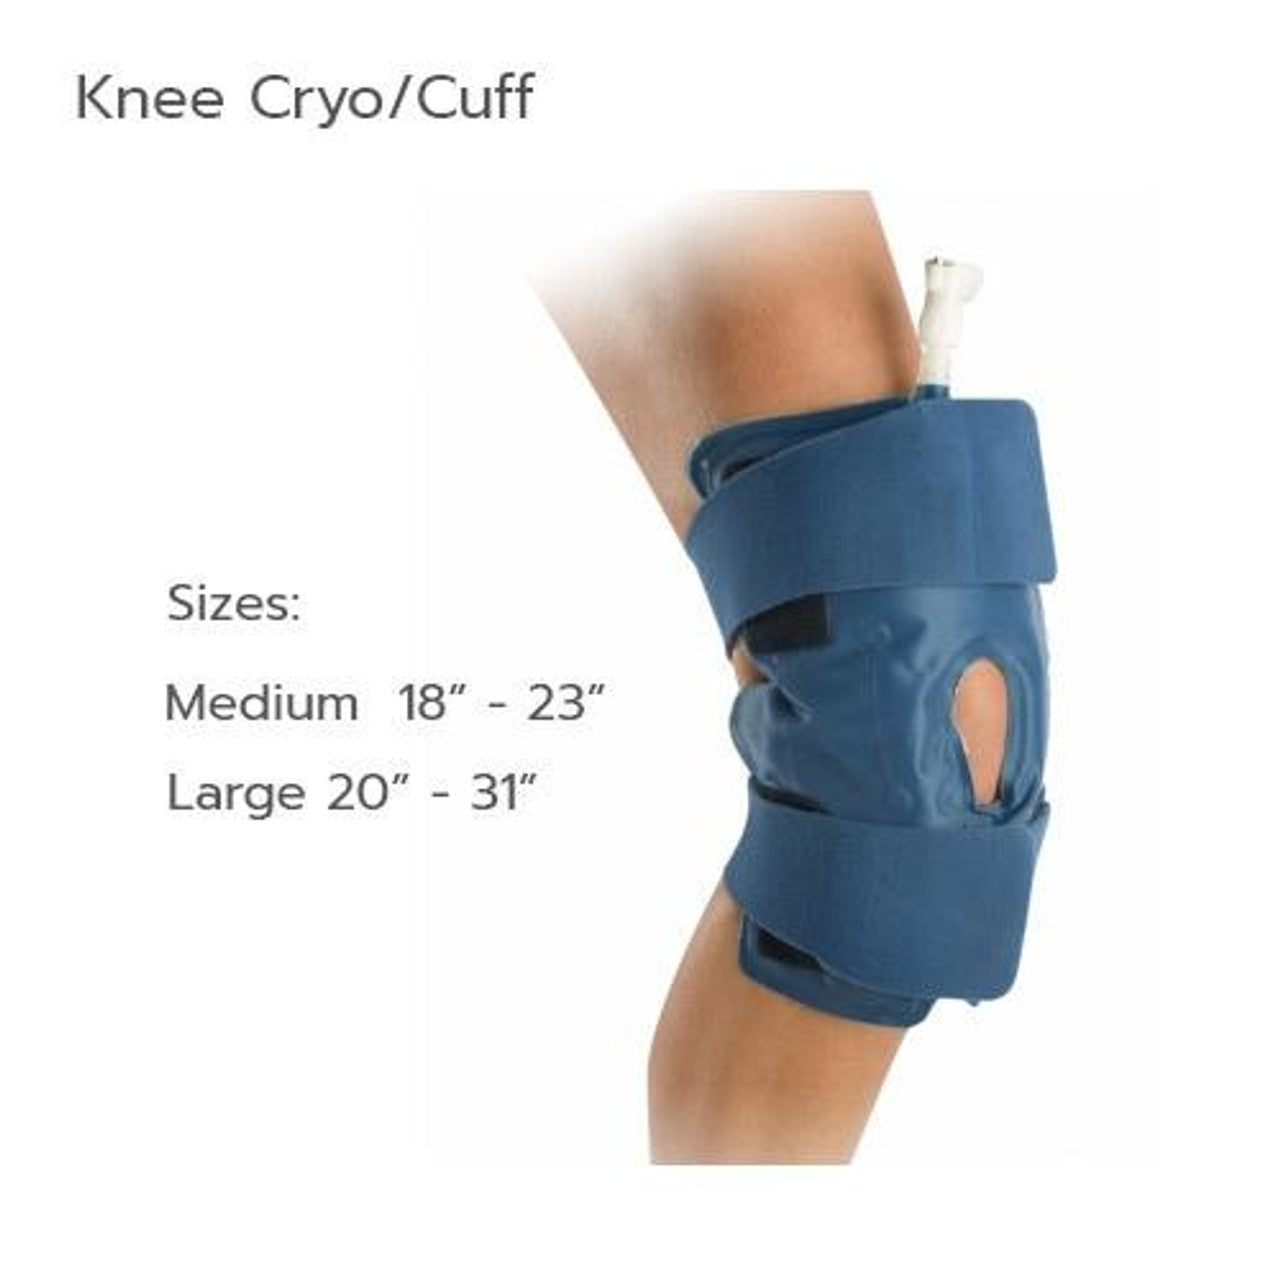 Aircast Knee Cryo Cuff - Sizing - SourceColdTherapy